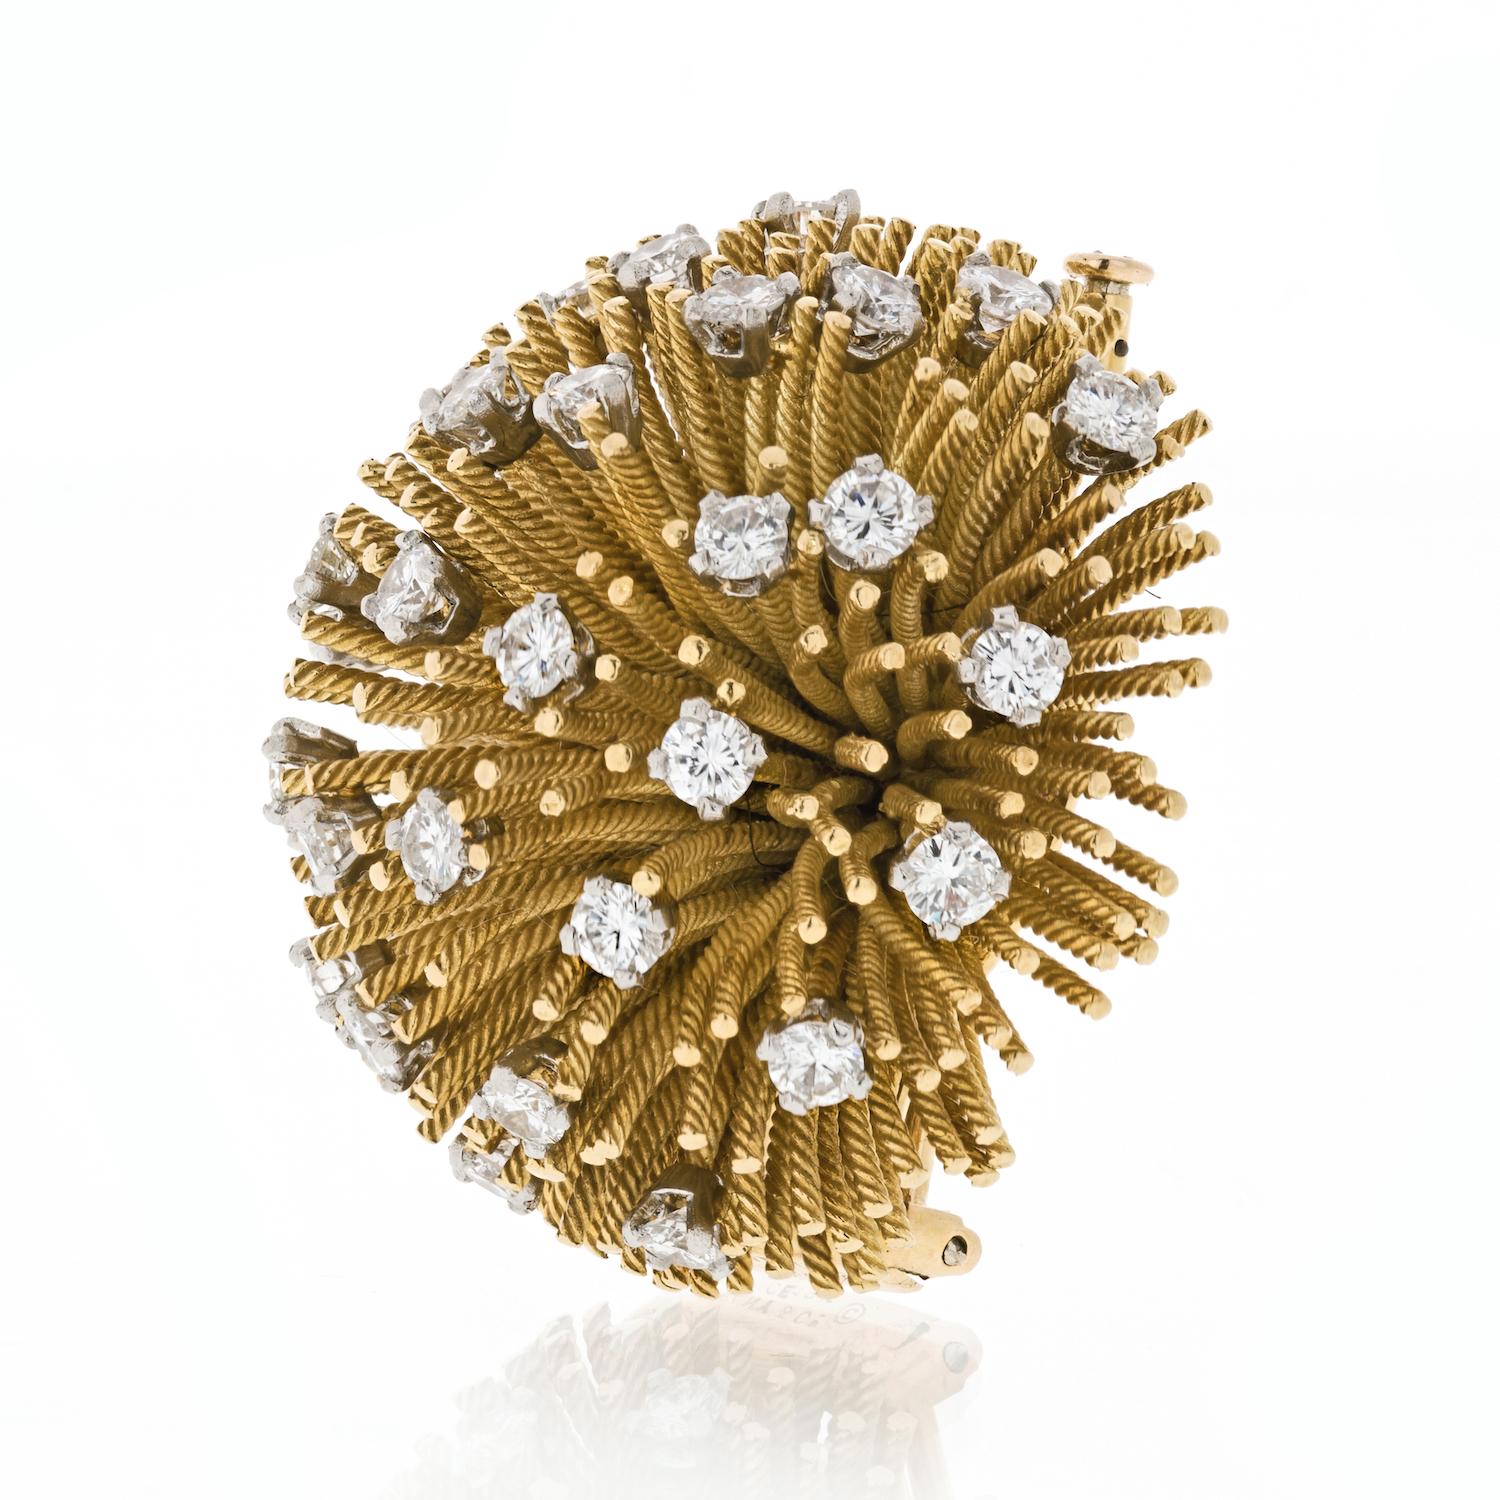 18K yellow gold vintage Tiffany & Co. sea urchin brooch with 3.41 carats of round brilliant diamonds and double stick pin closure. Circa 1960s.

Measurements: Length 1.3